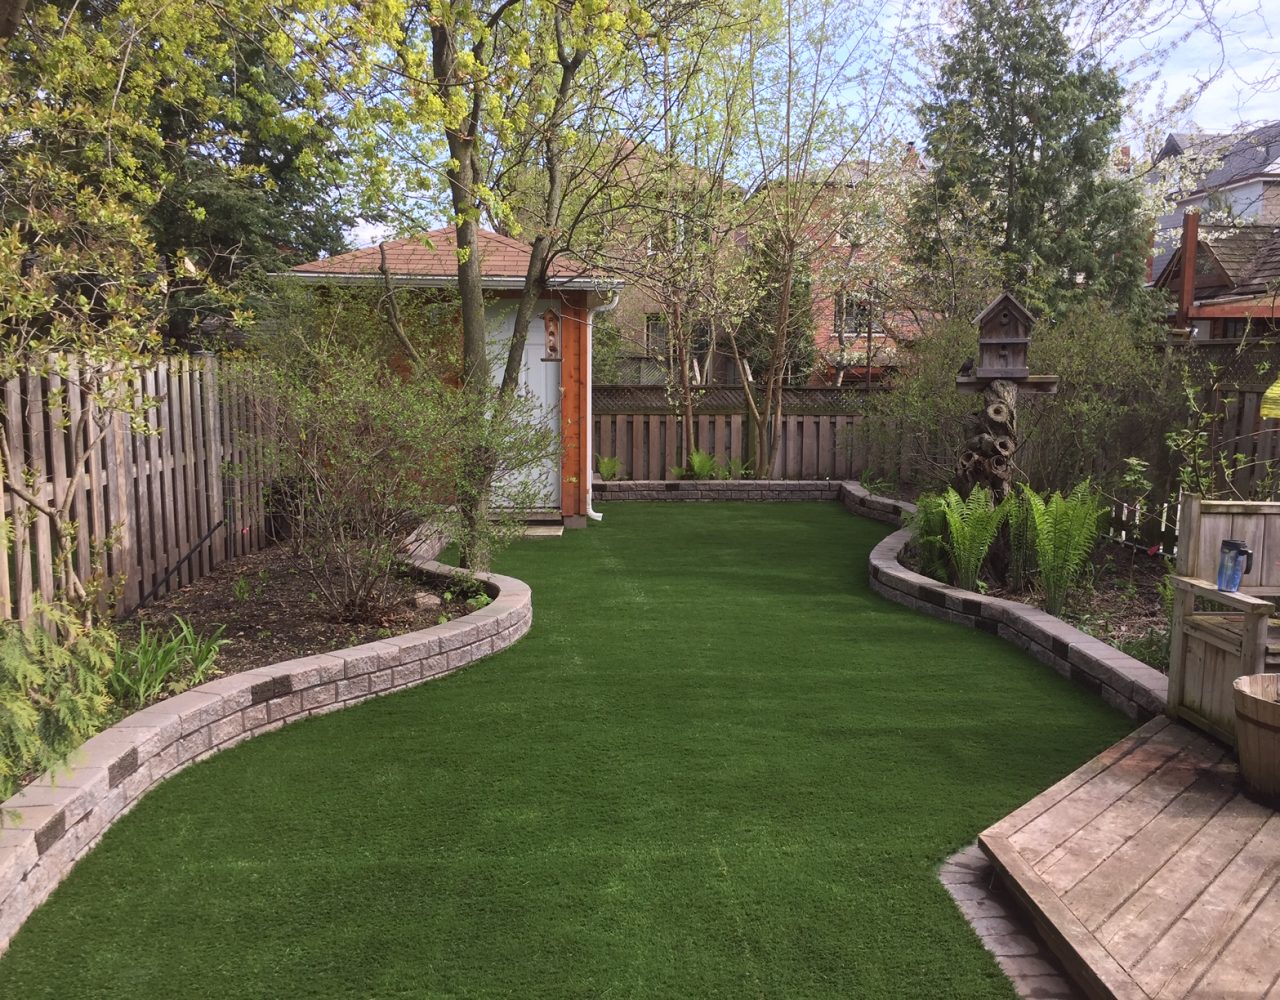 Curves look good but difficult to mow, artificial grass is the answer